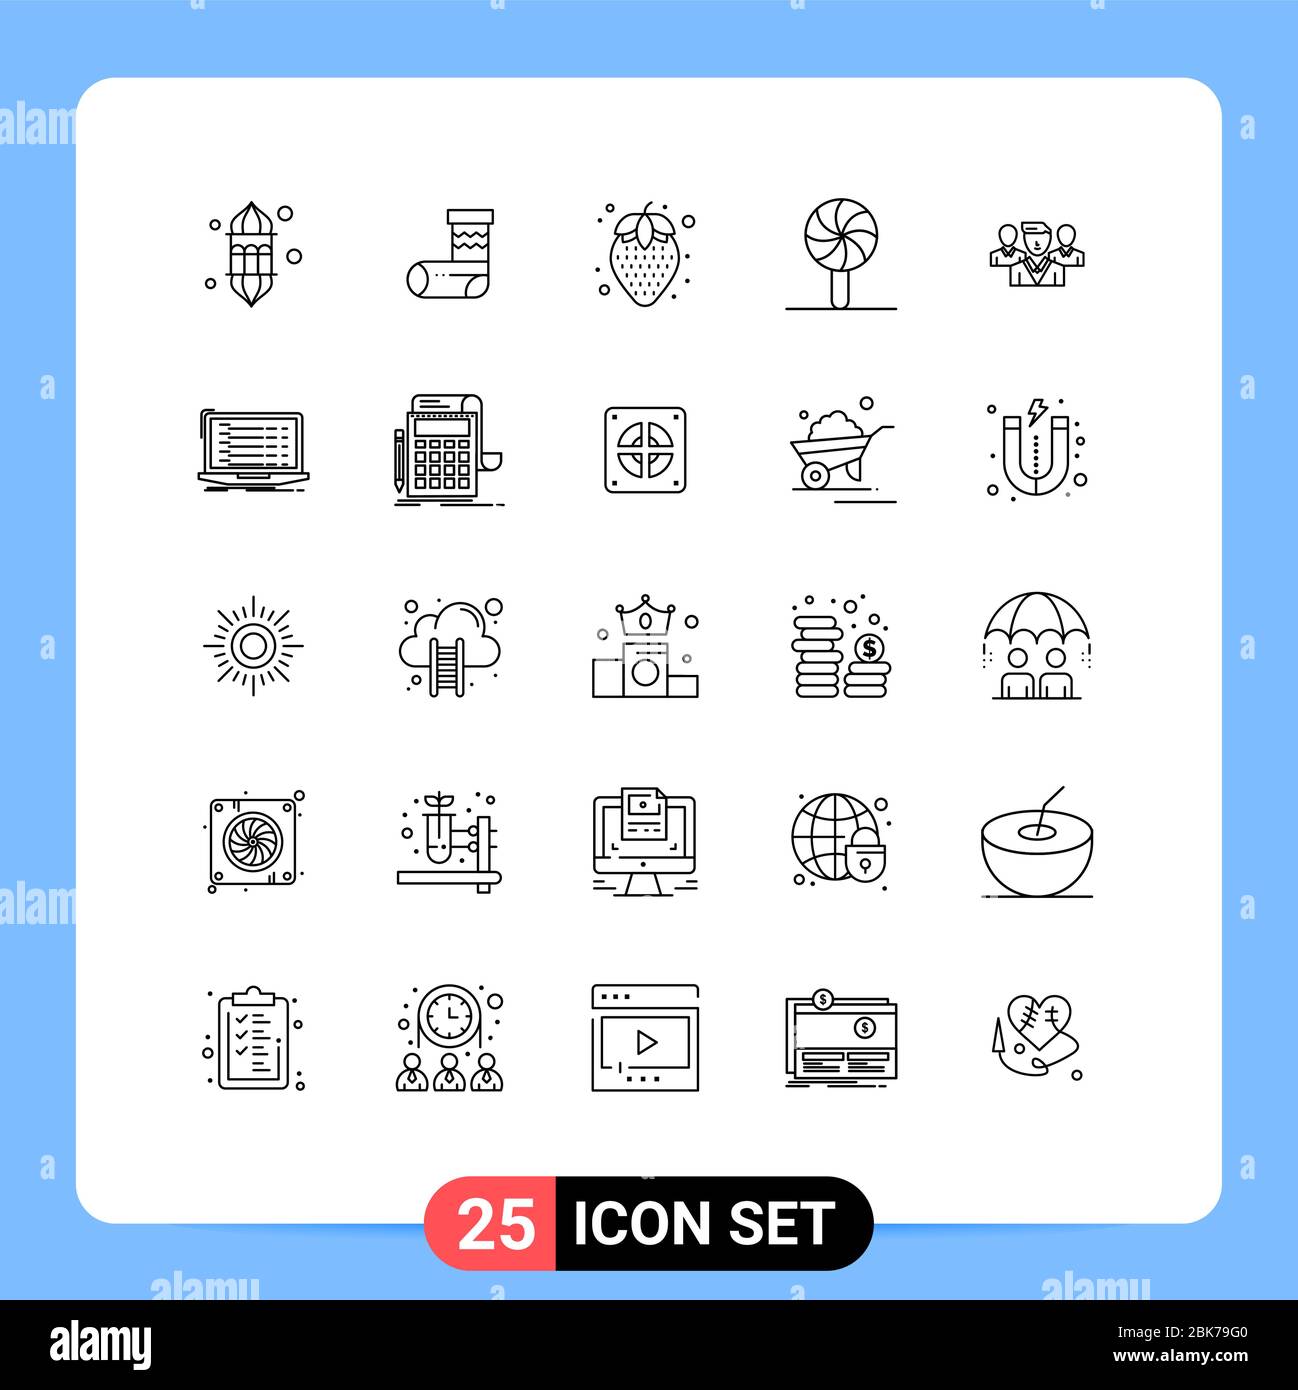 25 Universal Lines Set for Web and Mobile Applications security, lollipop, gift, holiday, christmas Editable Vector Design Elements Stock Vector